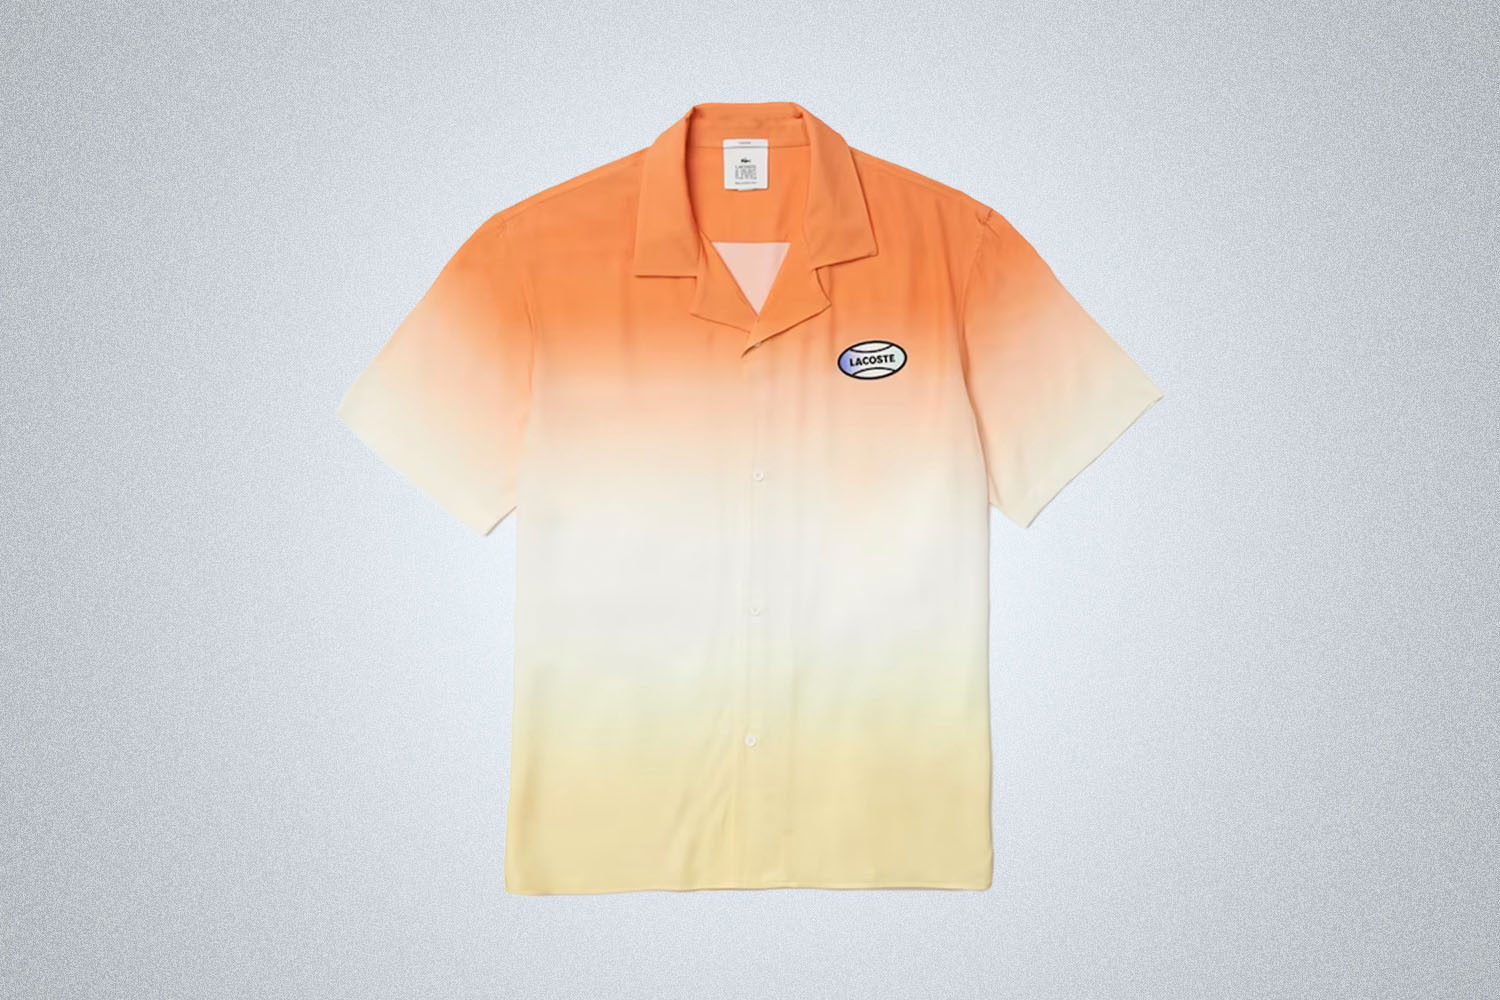 a orange, white and yellow gradient shirt from Lacoste on a grey background